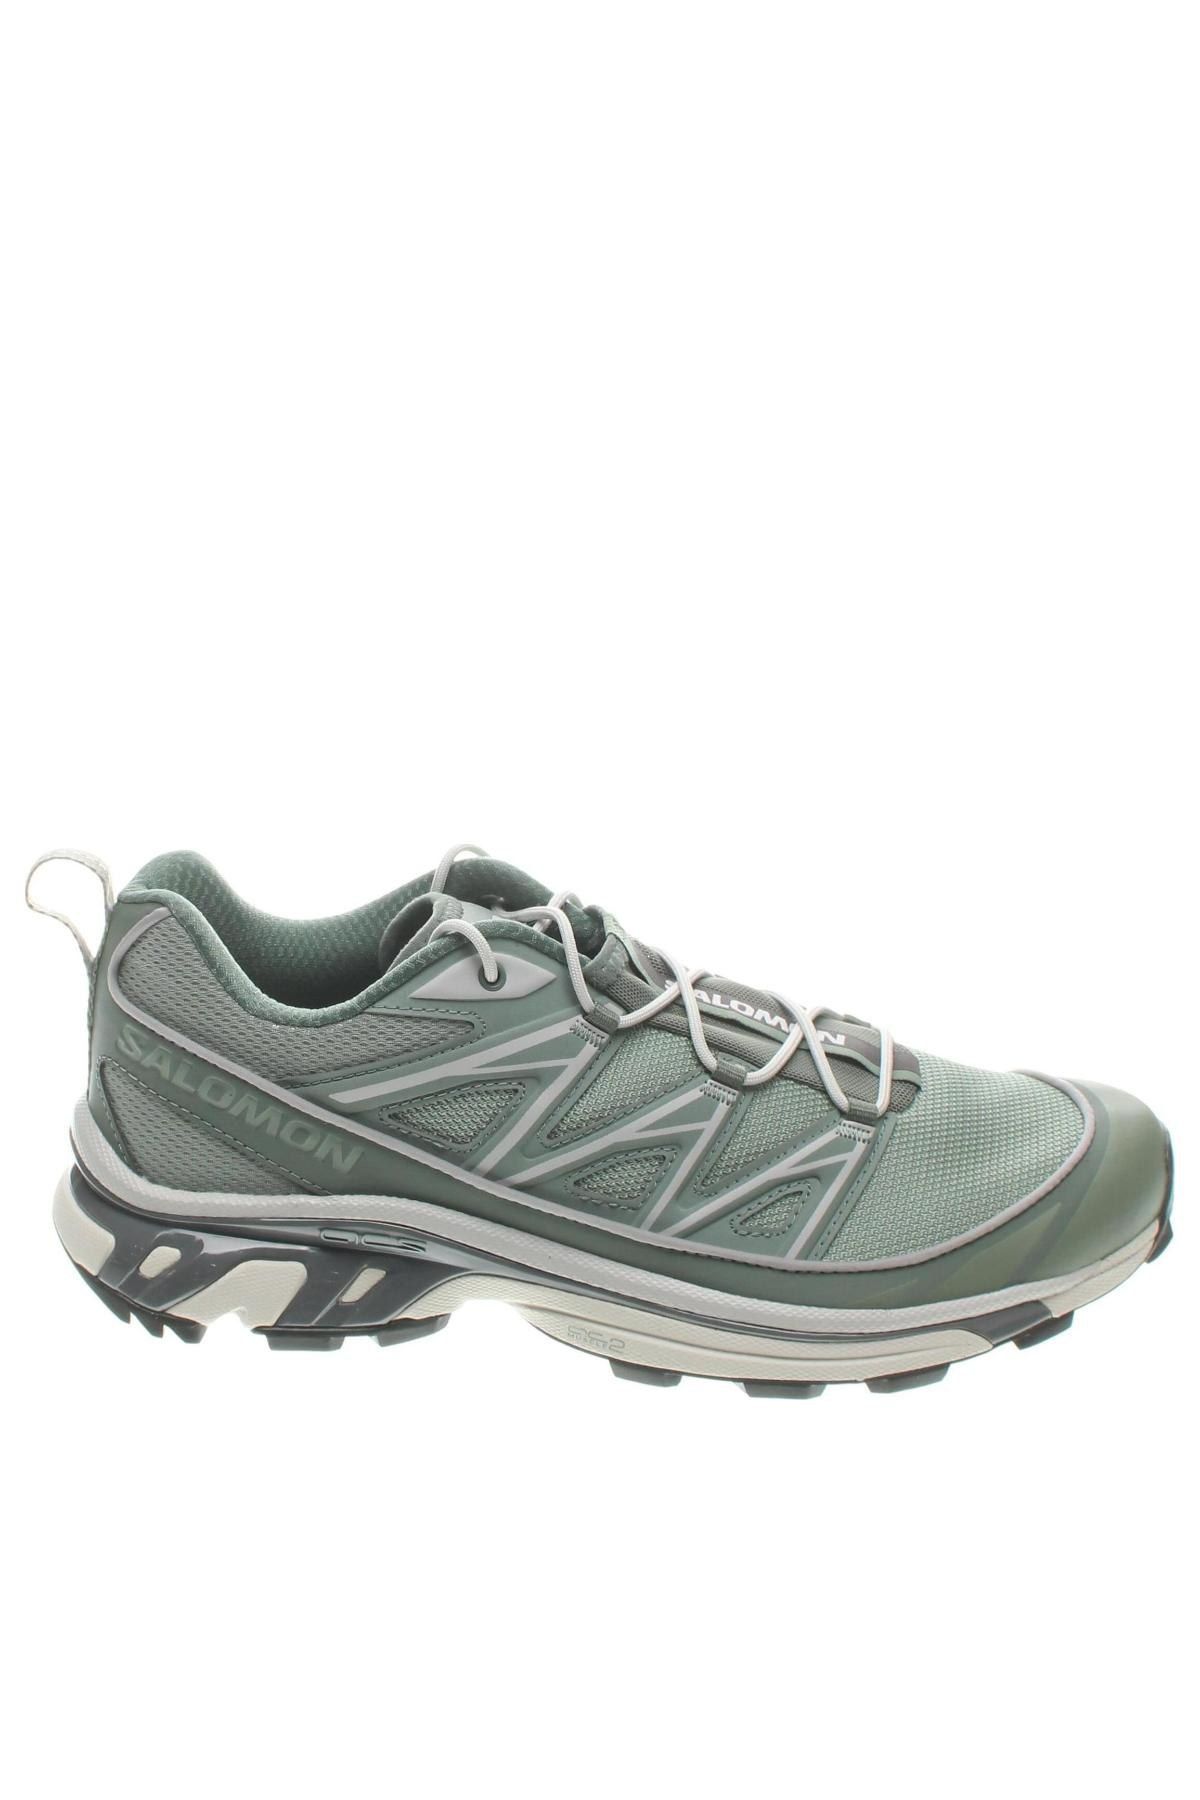 Pre-owned Salomon Xt-6 Expanse Lily Pad Pewter Shoes In Green/beige